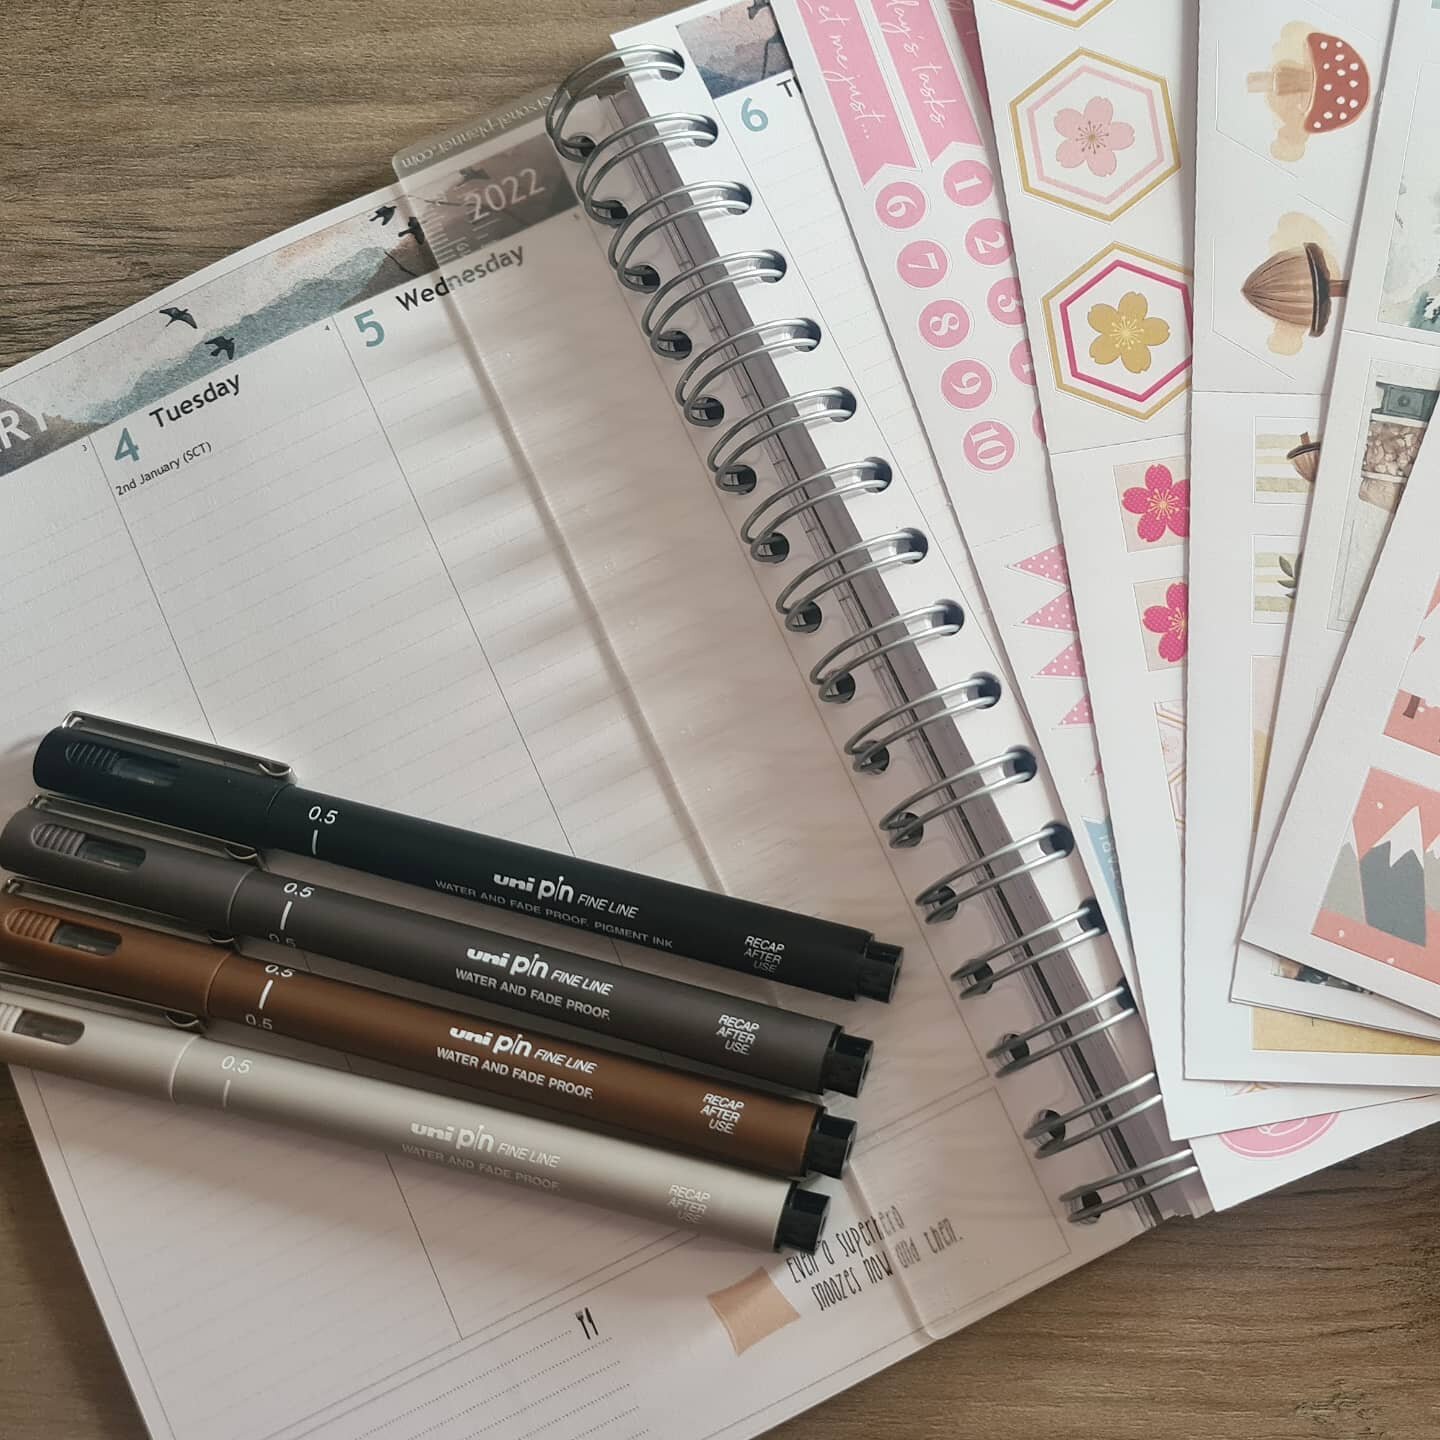 For quite a few years now I have got my yearly planner from @personalplanner even when I try something different I always come back to their planners. They just work for me.
So I am very excited to be able to use for work and home and got some new pe